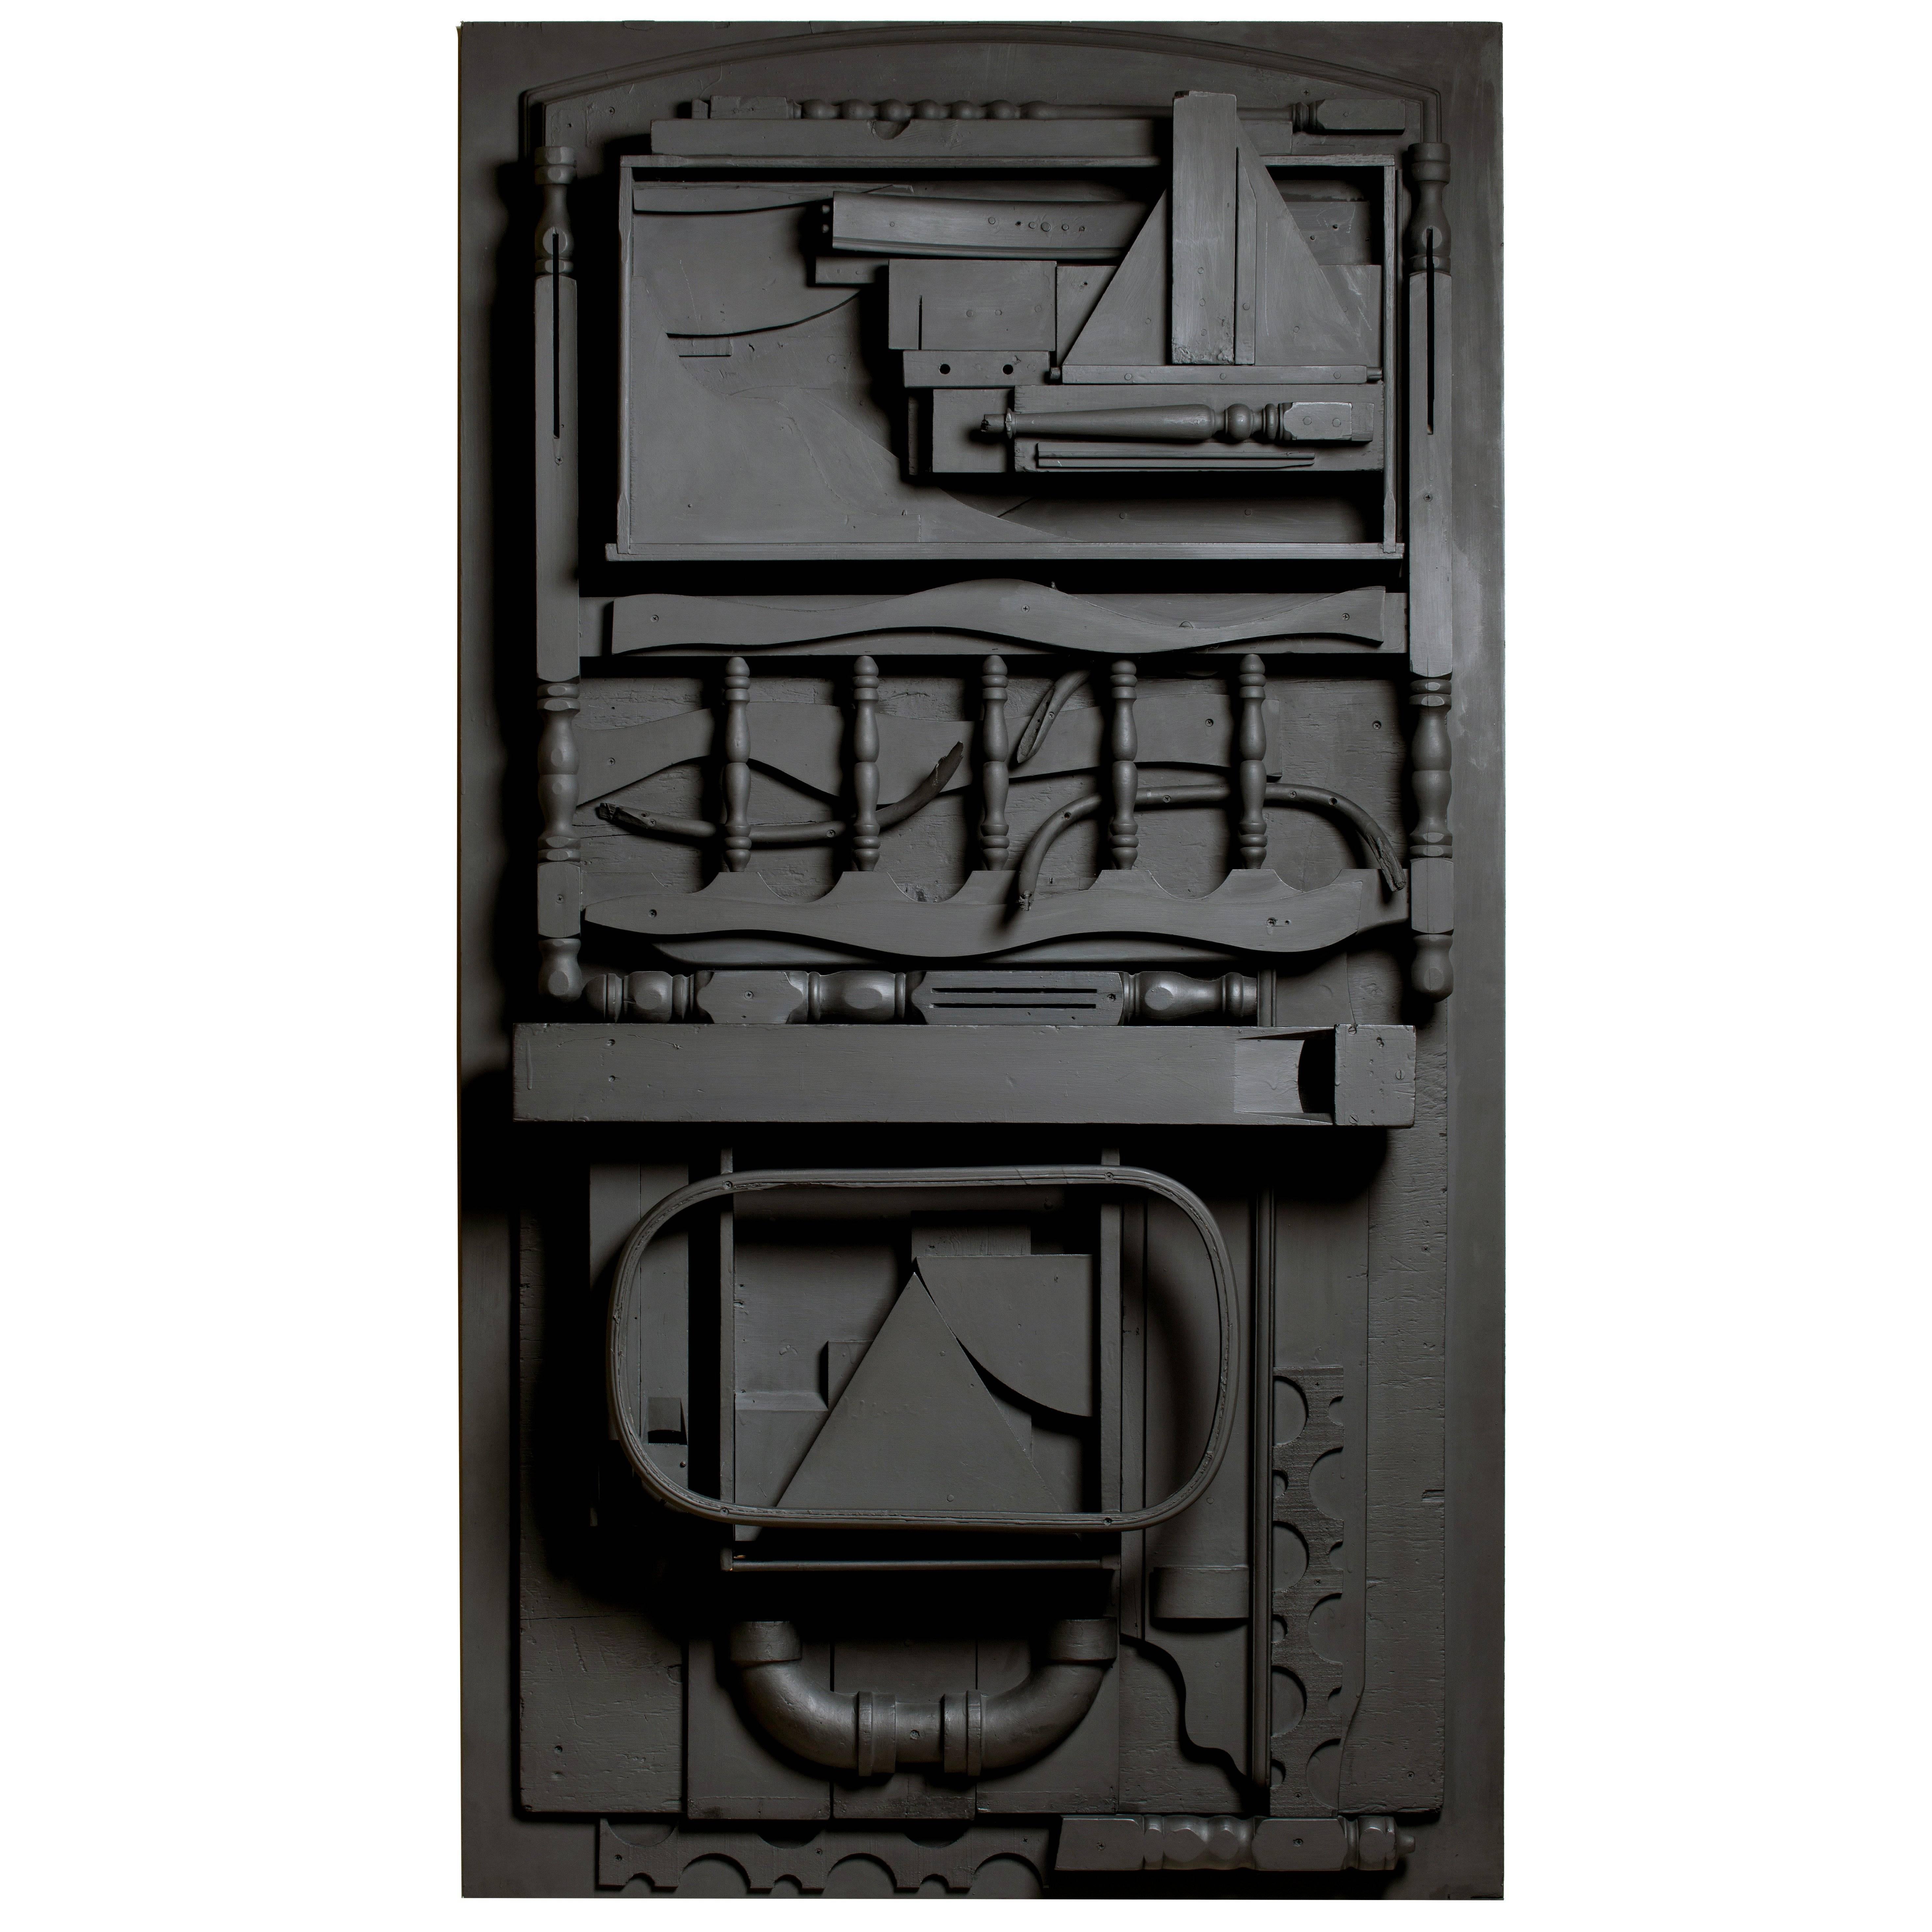 What were Louise Nevelson's sculptures called?